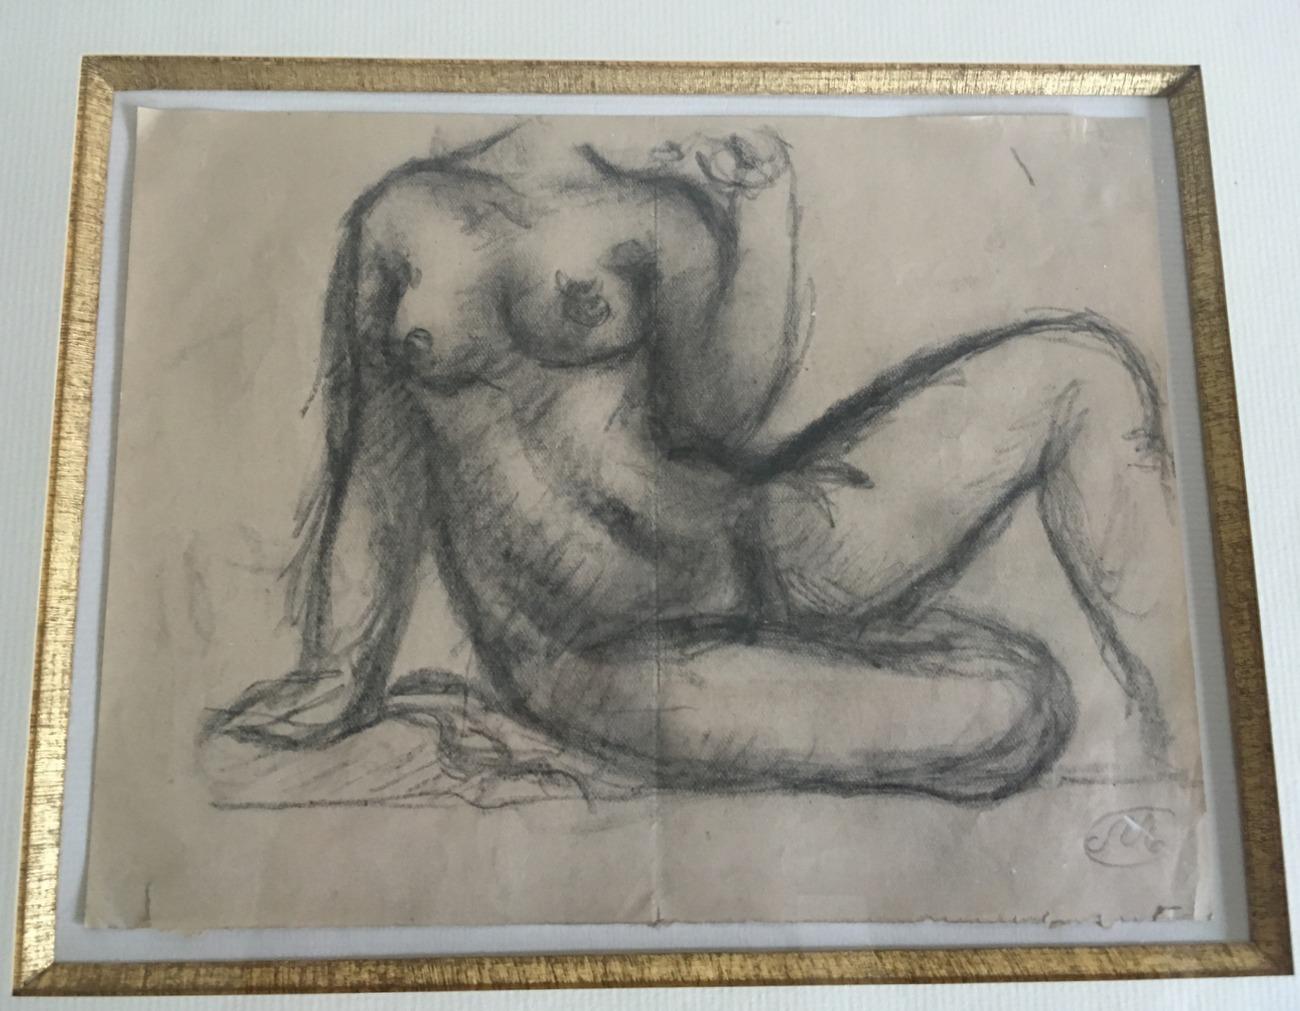 Paper Early 20th Century Pencil Sketch by Aristide Maillol